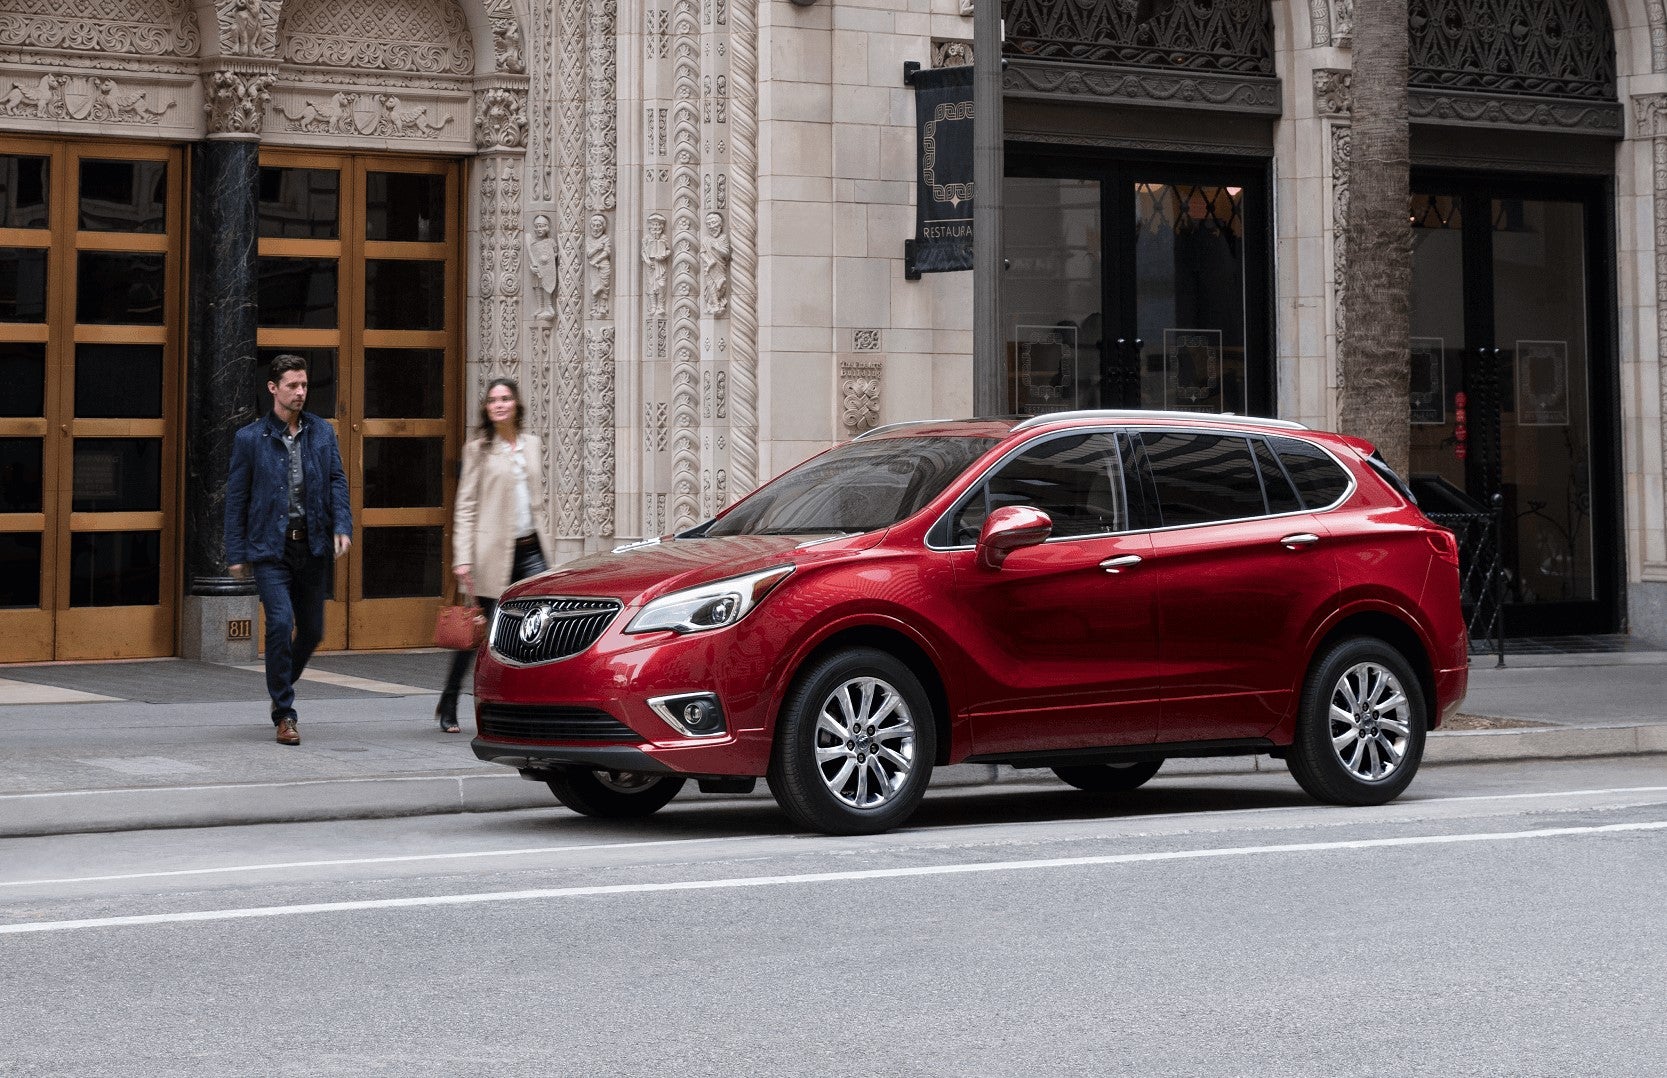 Buick Envision for Sale near Noblesville IN
